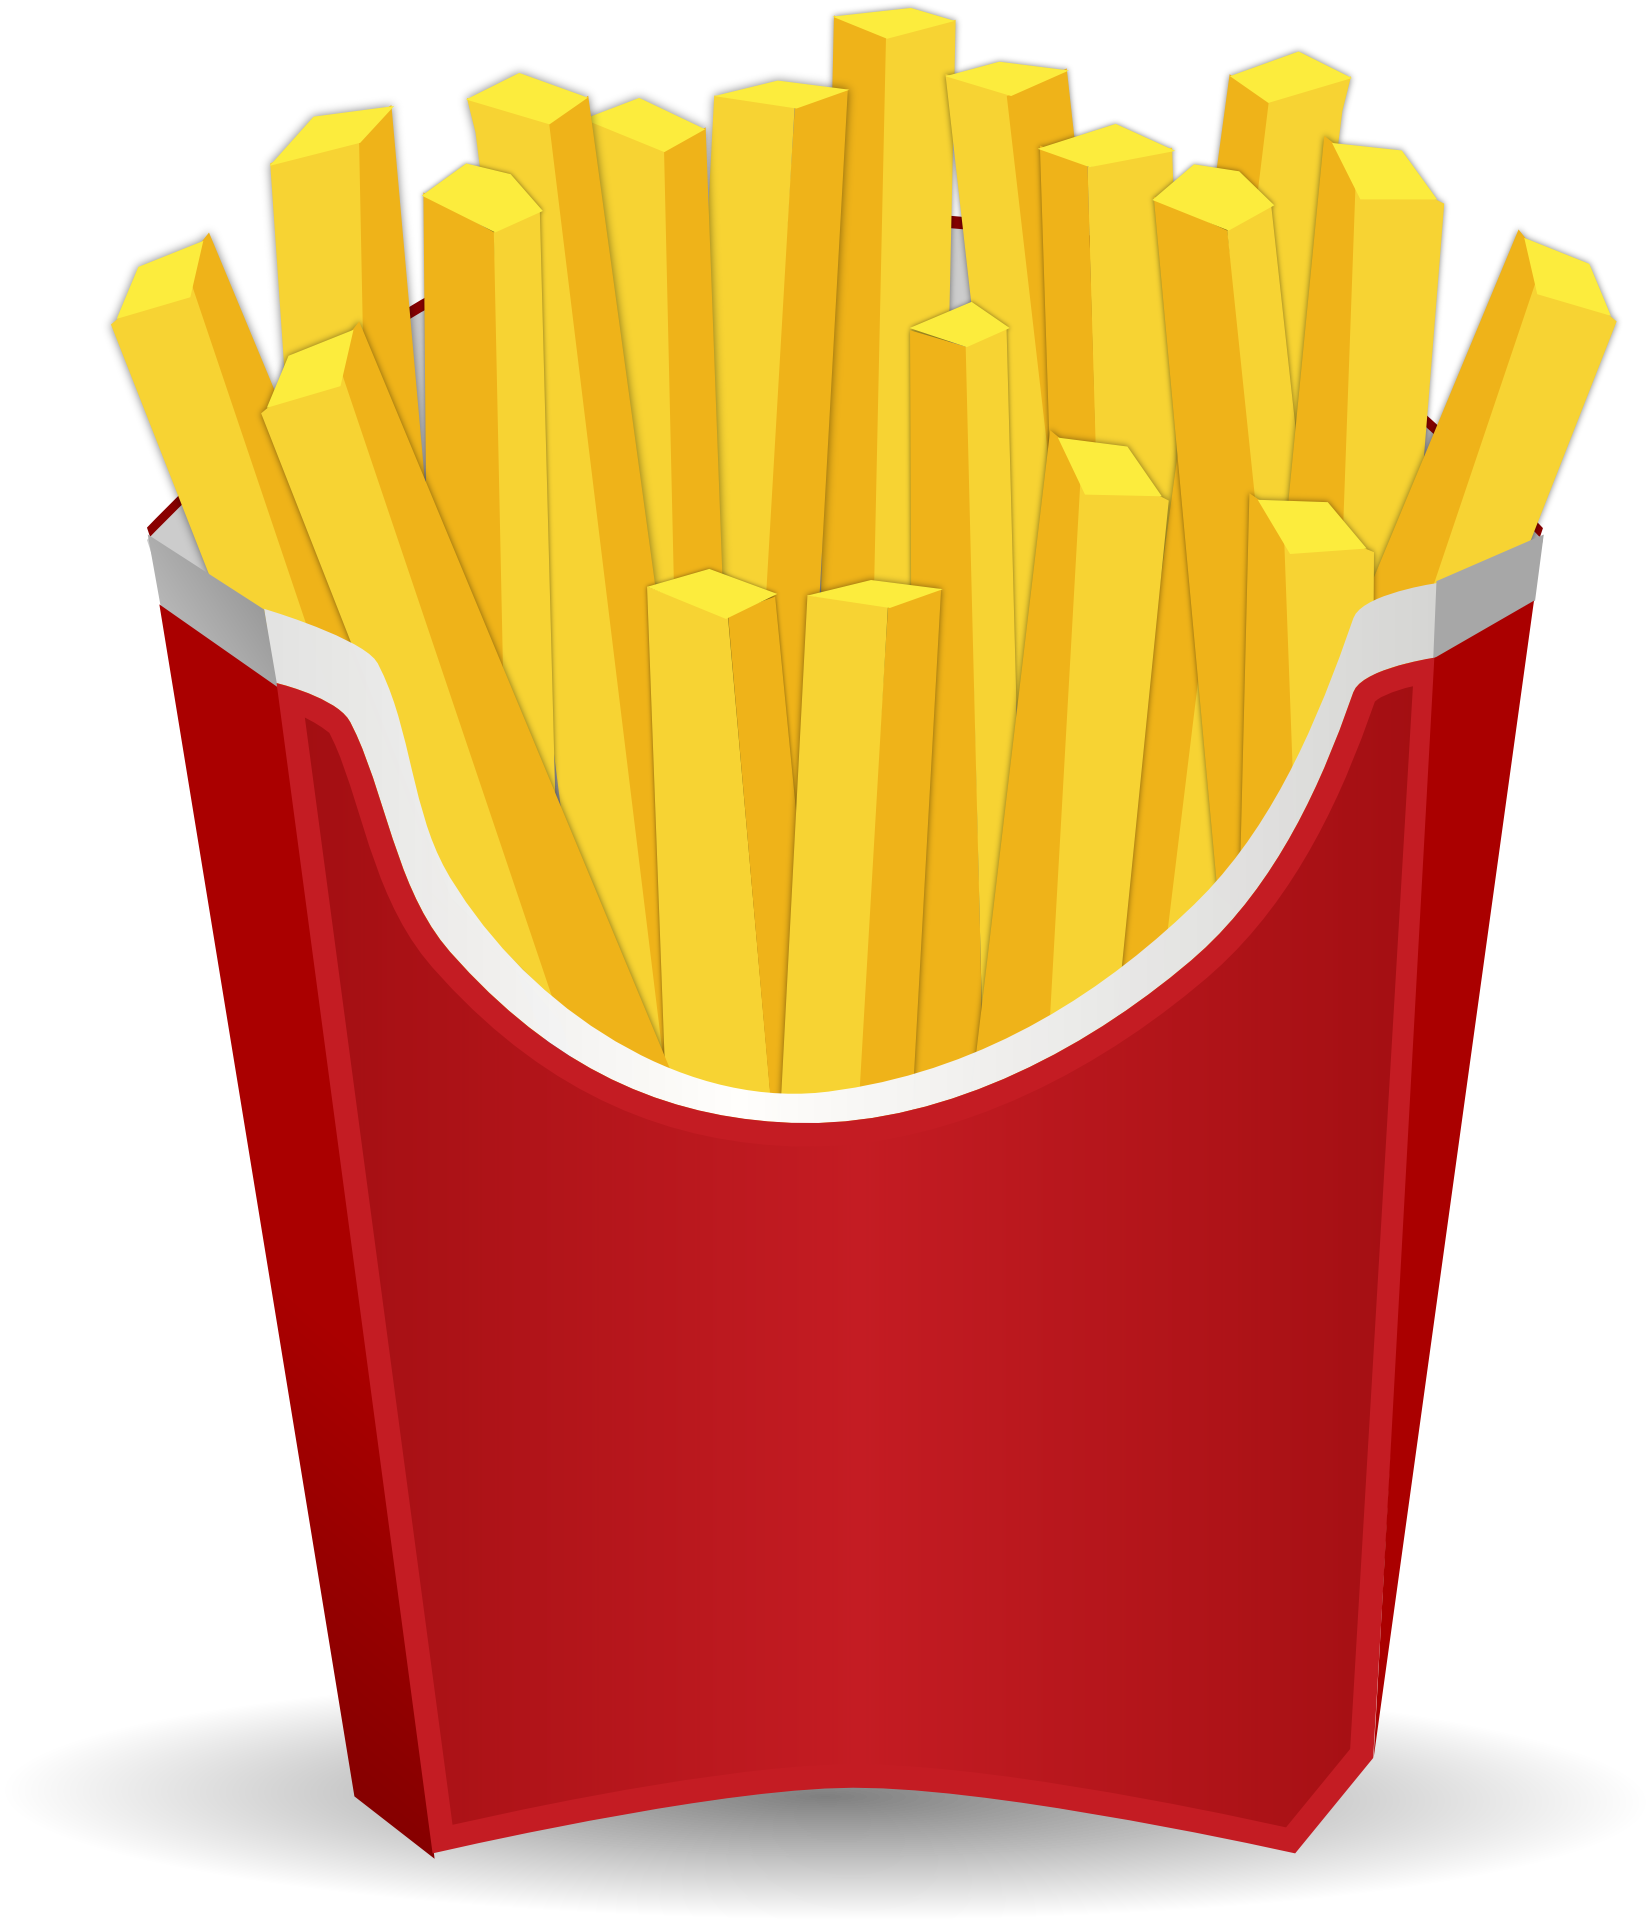 FRENCHFRIES